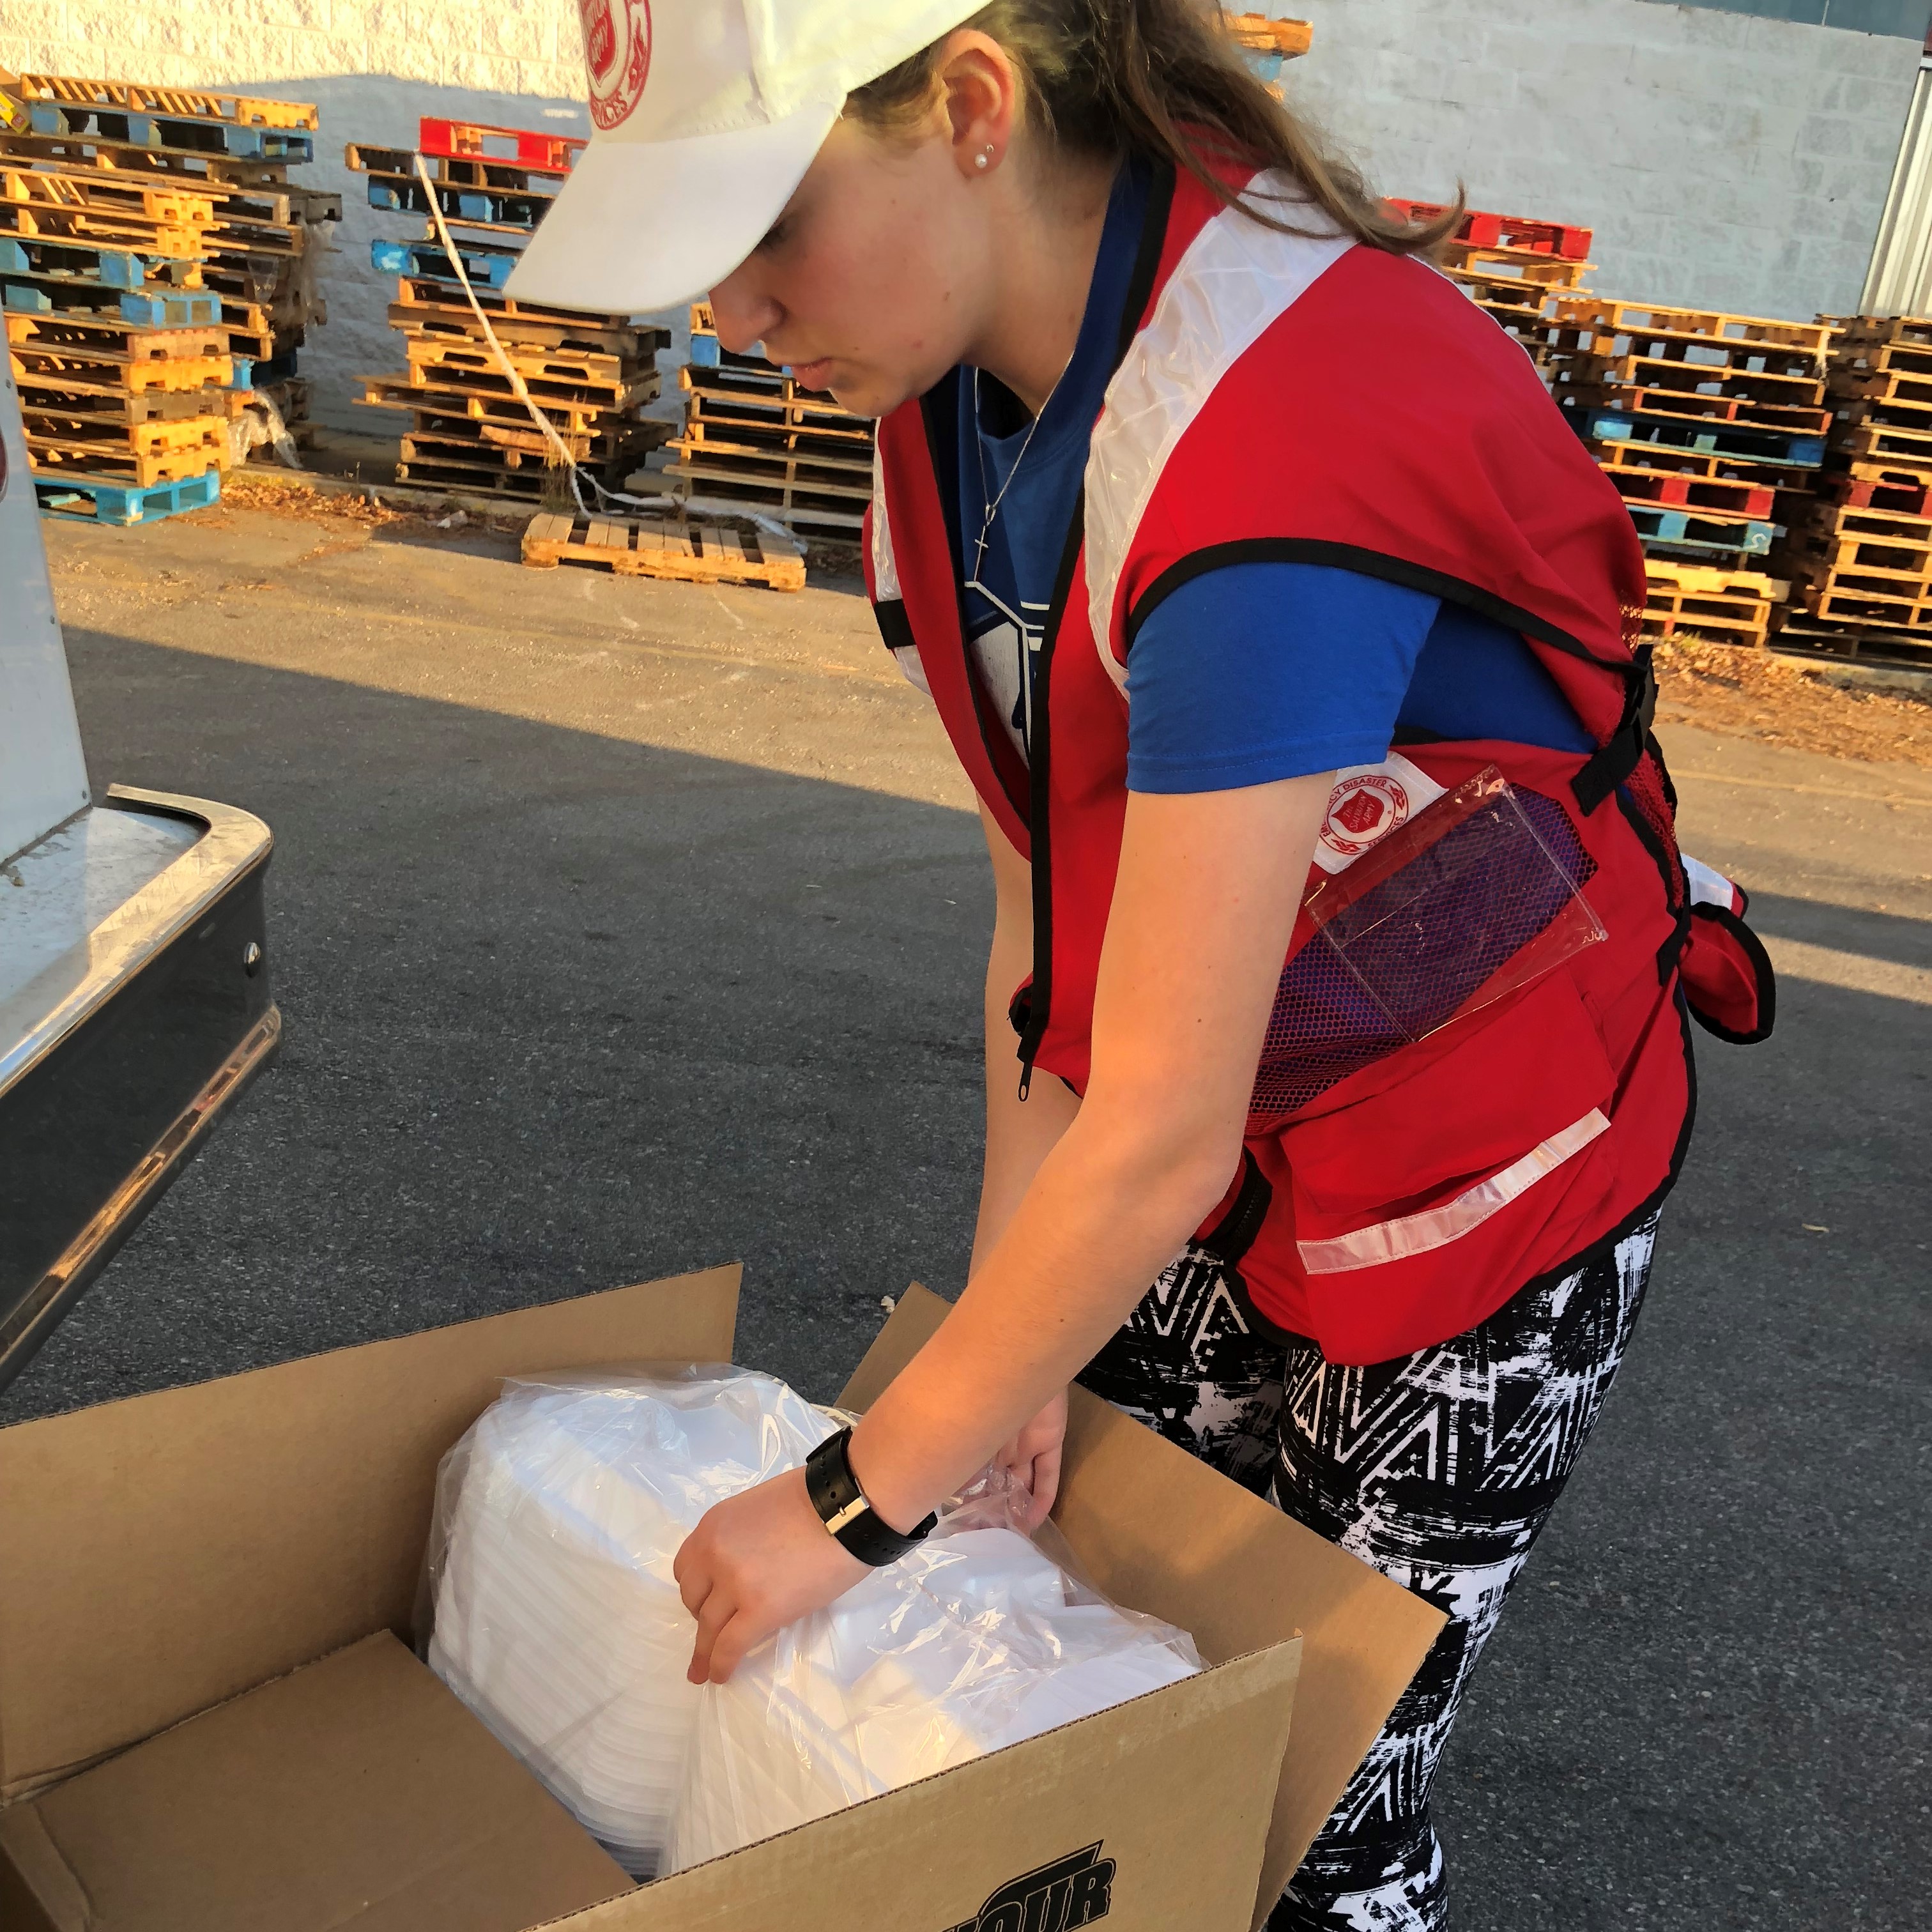 Serving after Hurricane Michael Strikes